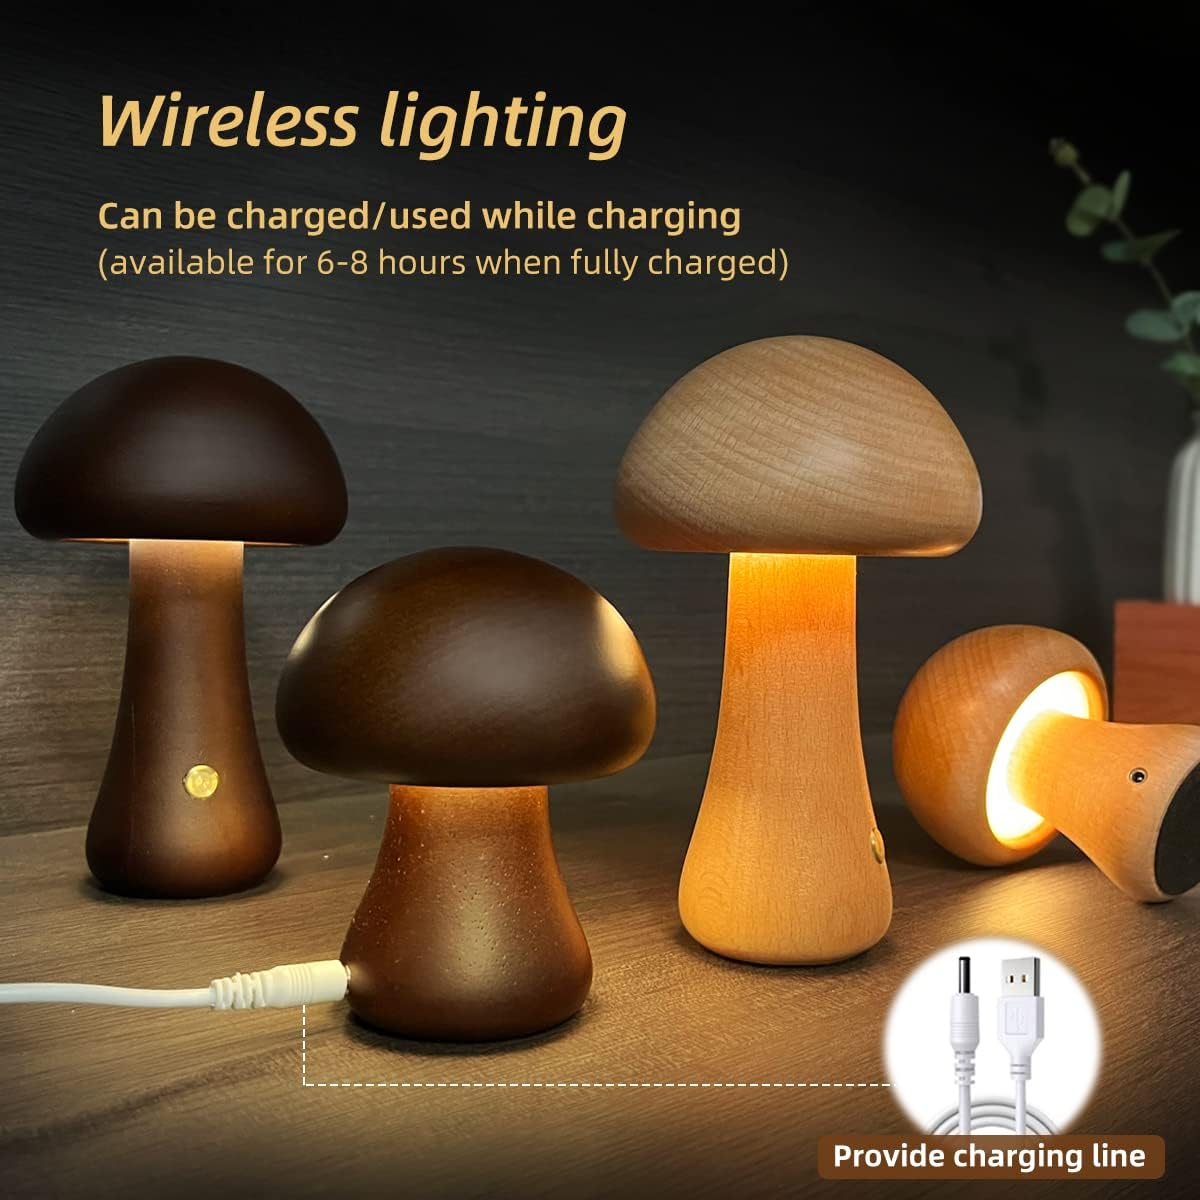 Night Lamps | Wooden Cute Mushroom LED Night Light With Touch Switch  Bedside Table Lamp For Bedroom Childrens Room Sleeping Night Lamps Home Decor | f6c5ad-5d.myshopify.com